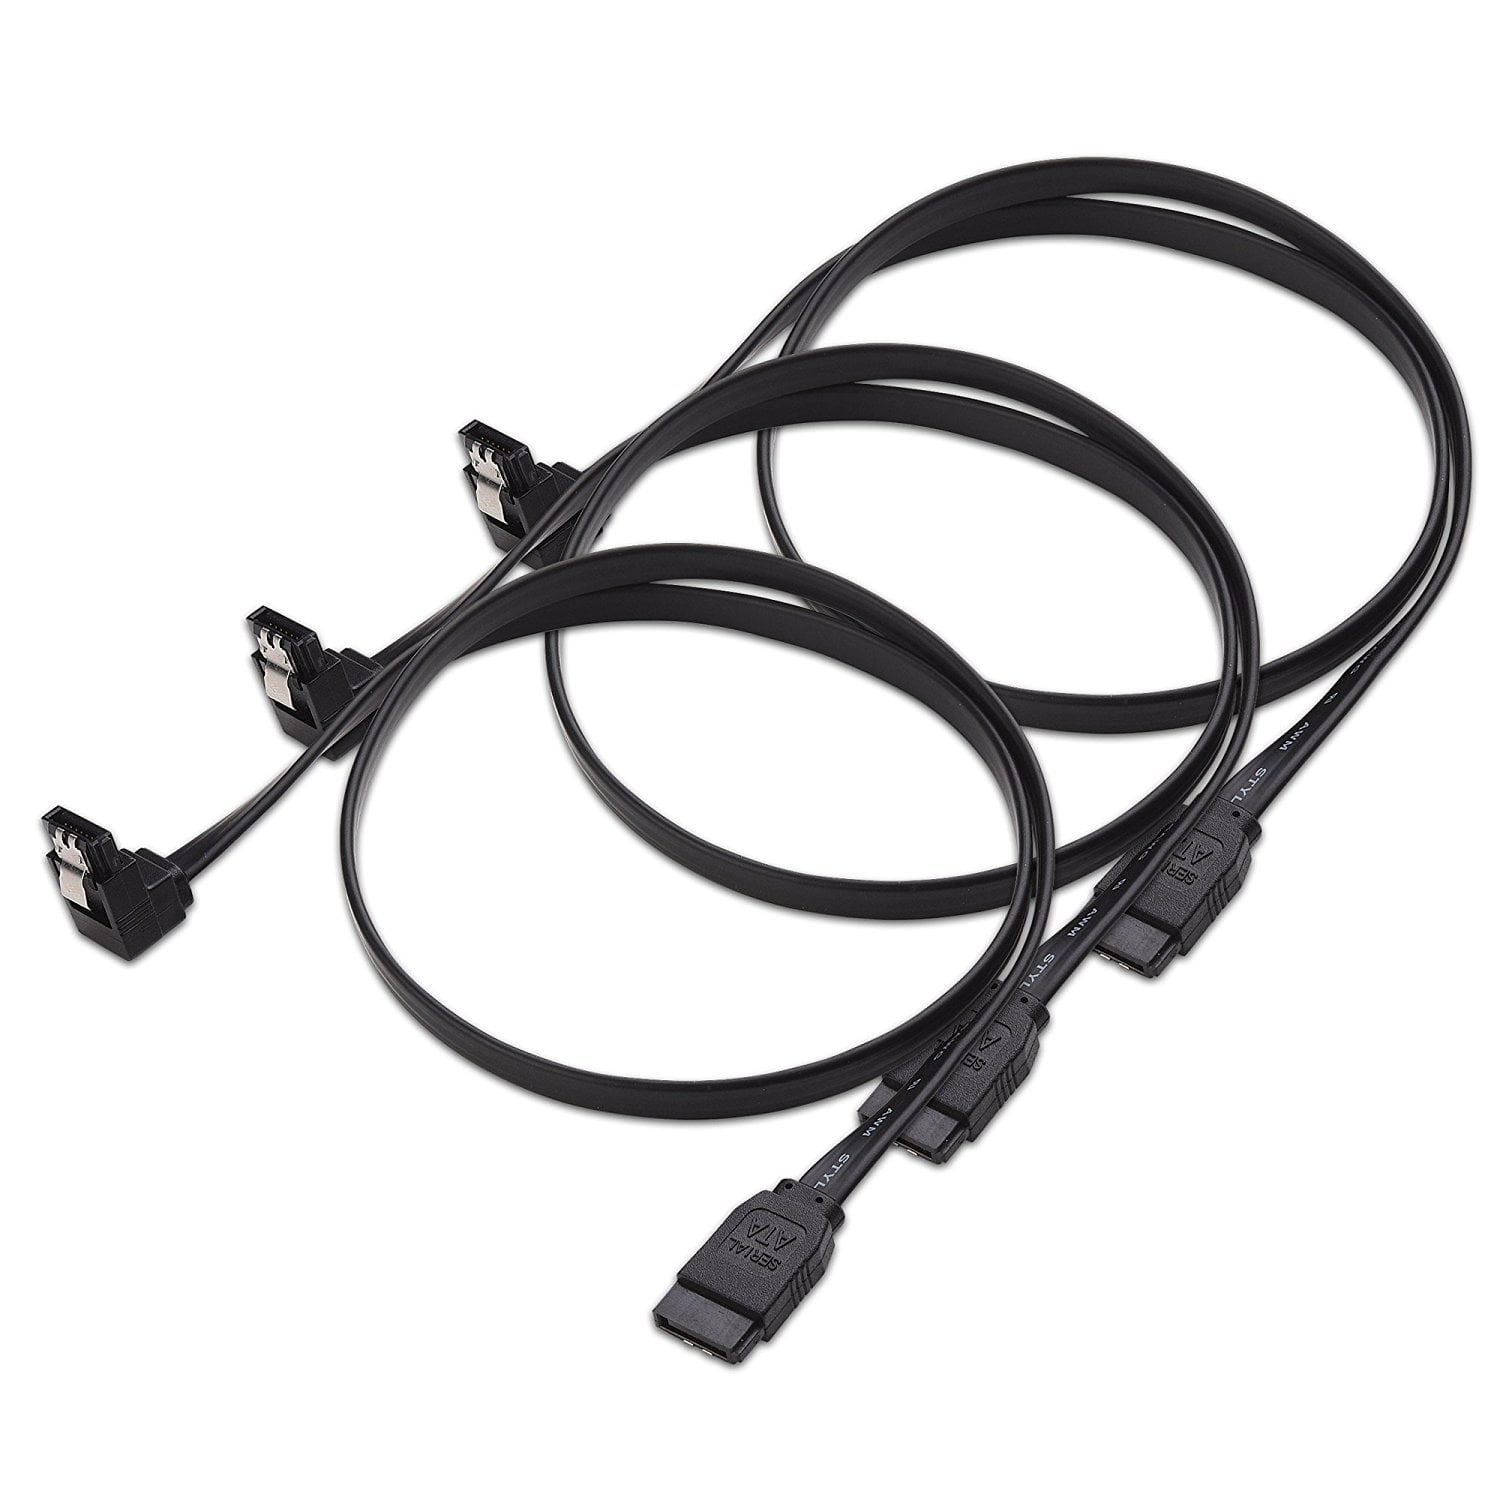 6" Inch Serial ATA SATA-II 3.0Gbps Straight to 90 Degree Right-Angled Data Cable 